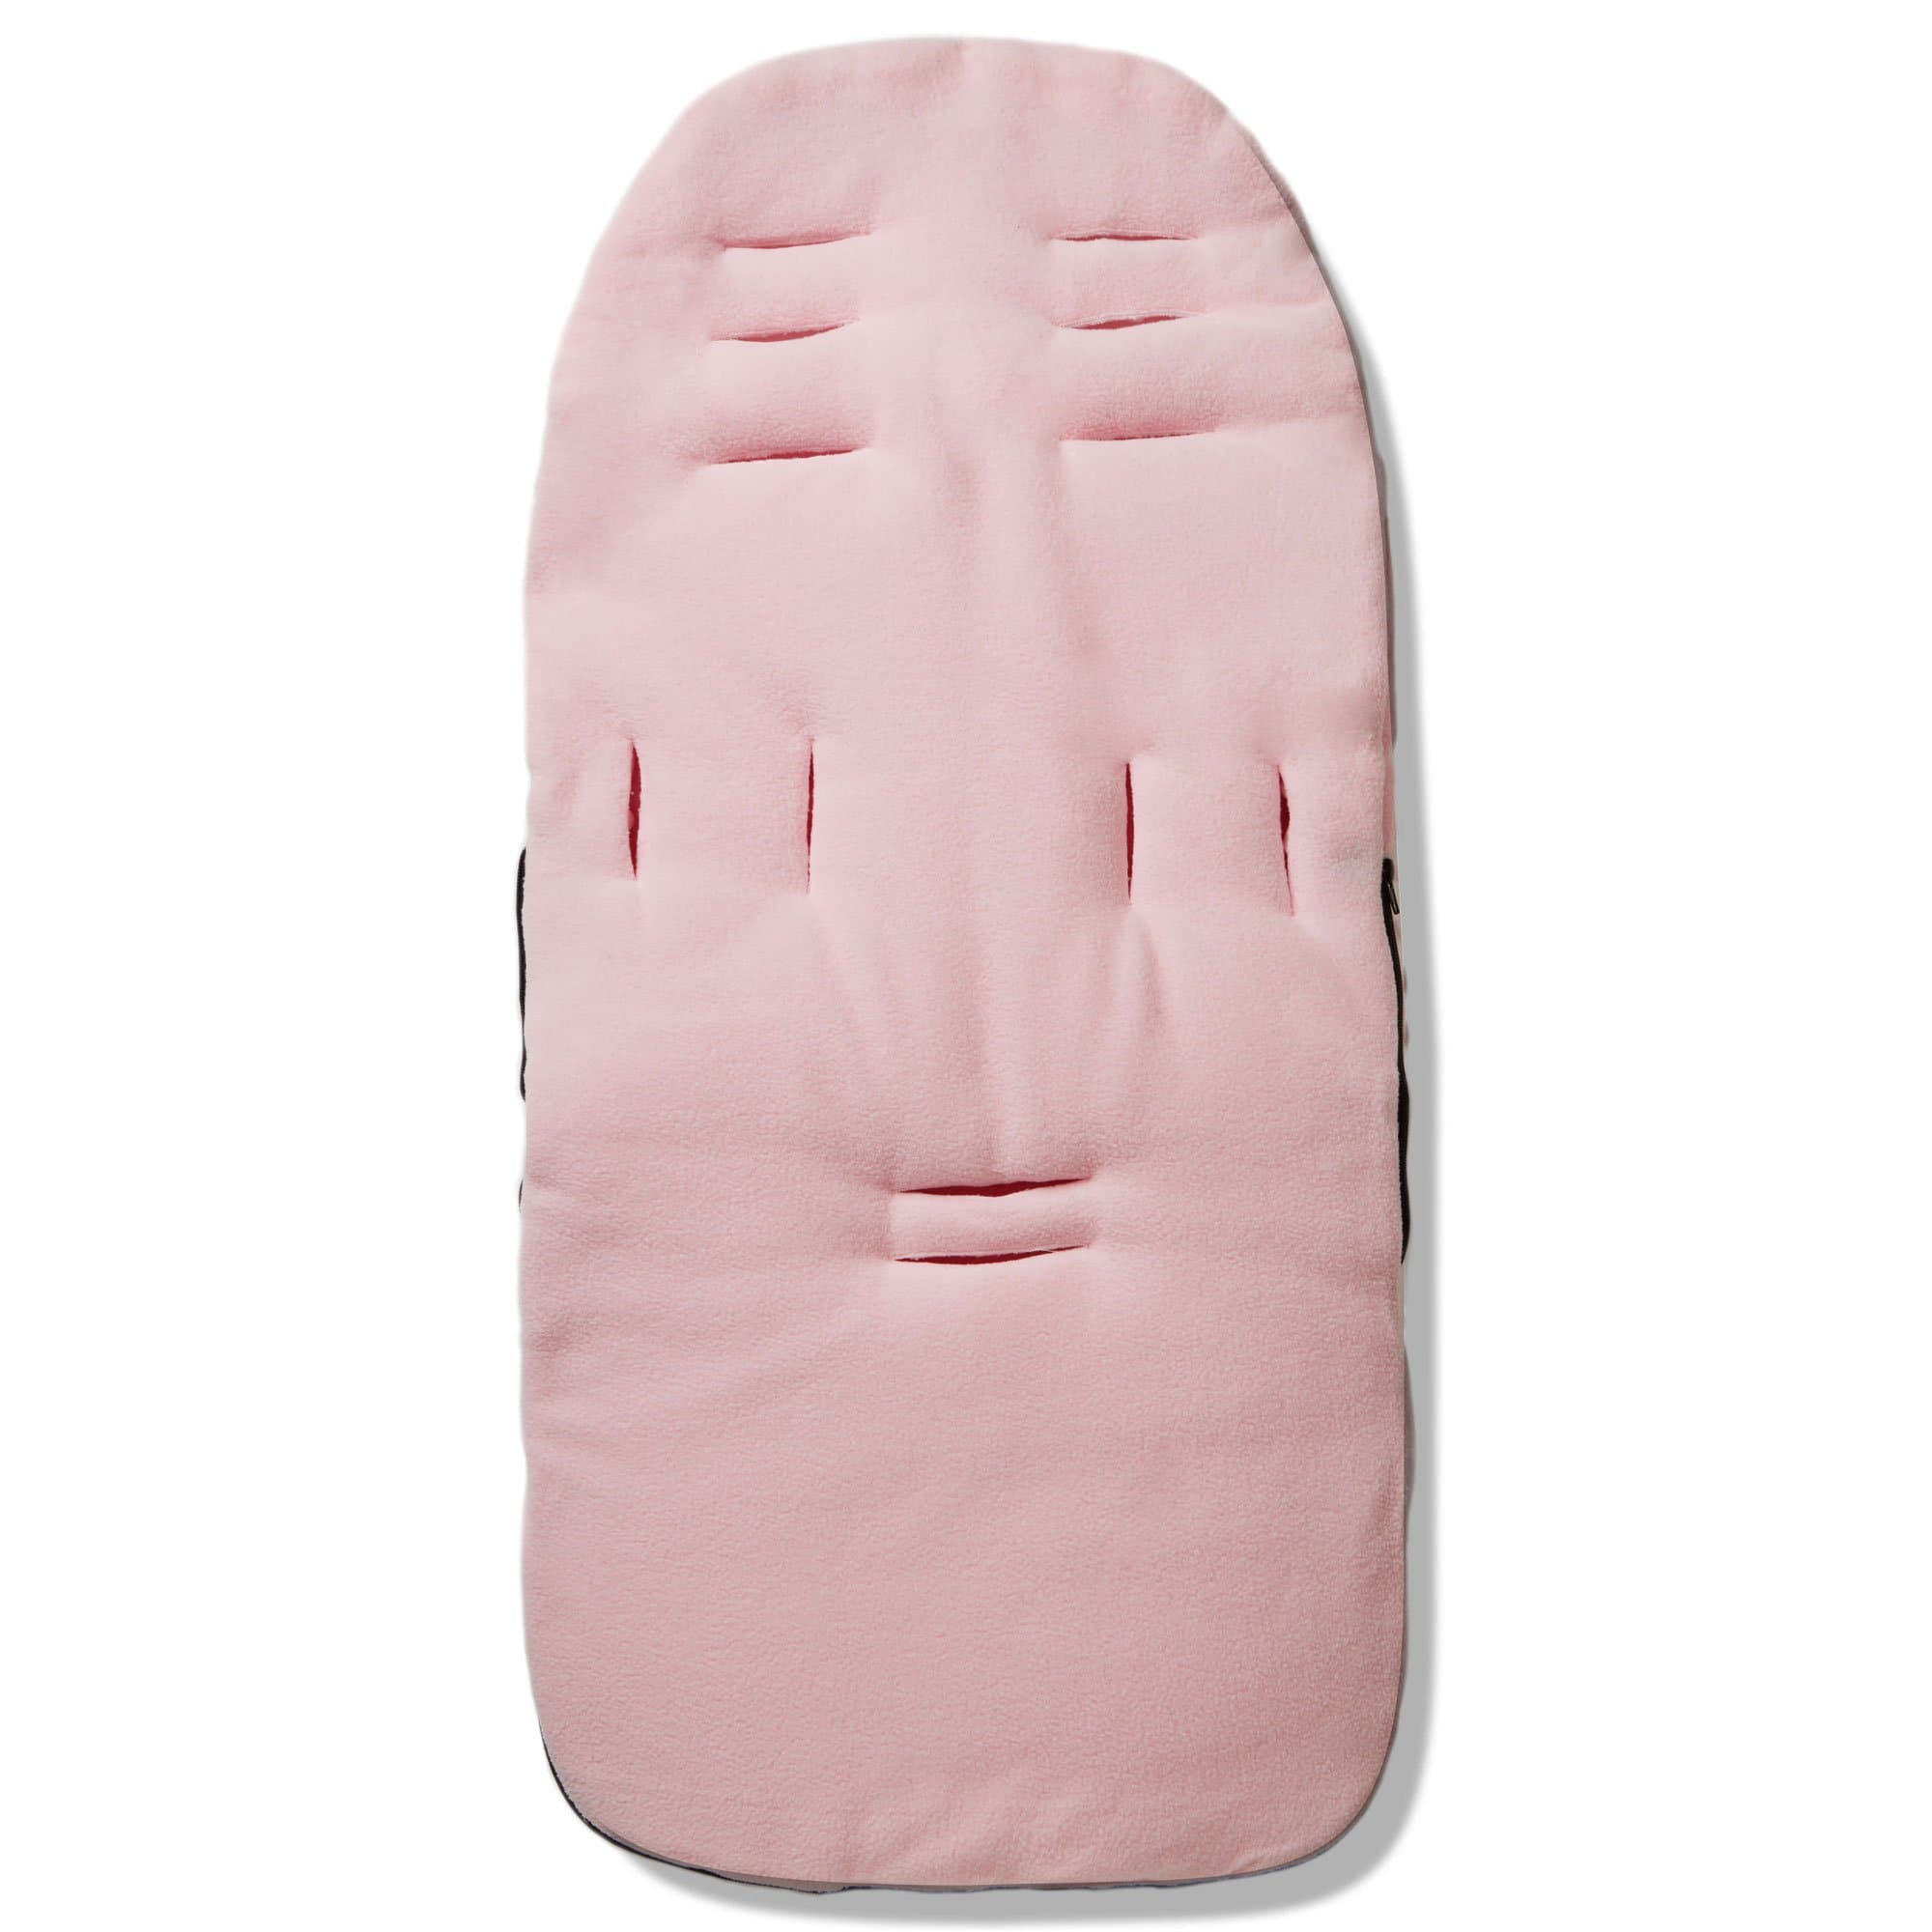 Dimple Footmuff / Cosy Toes Compatible with Babybus - For Your Little One